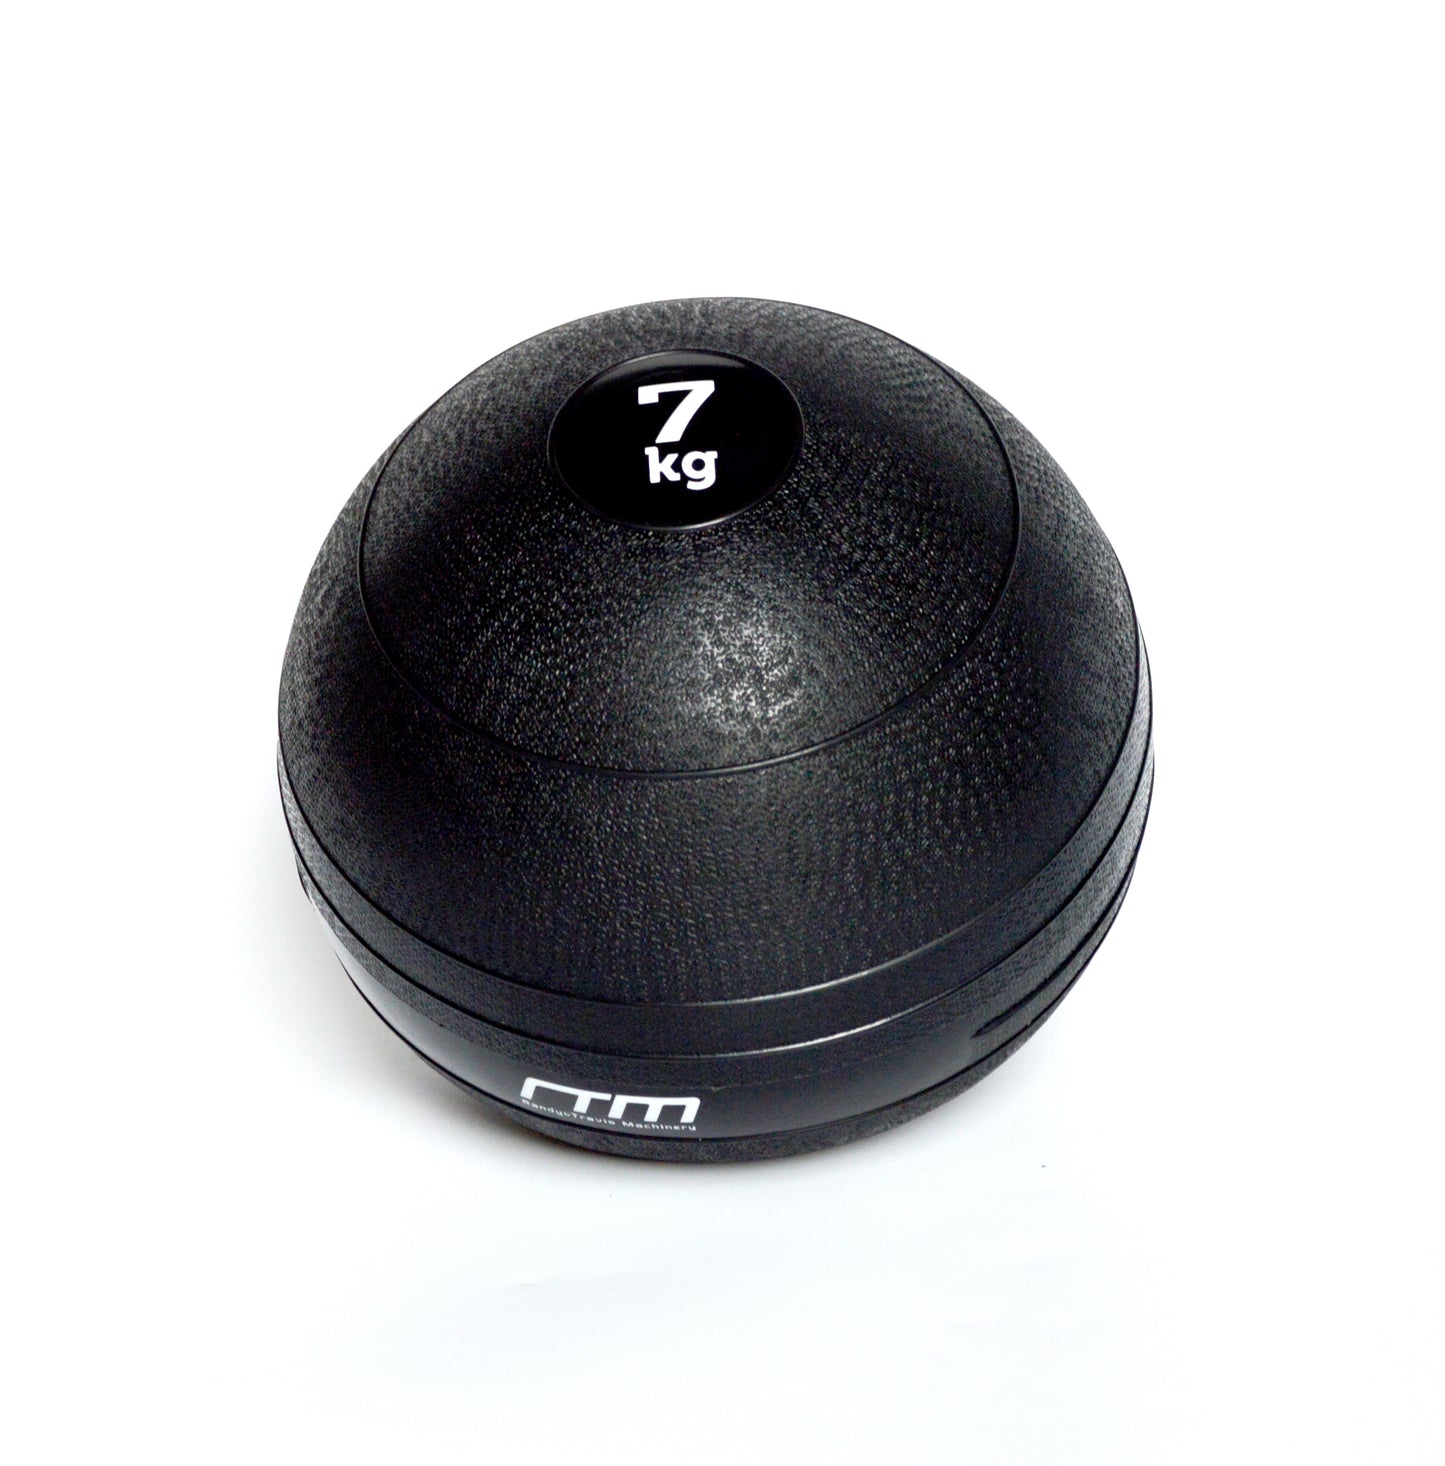 7kg Slam Ball No Bounce Crossfit Fitness MMA Boxing BootCamp - image1